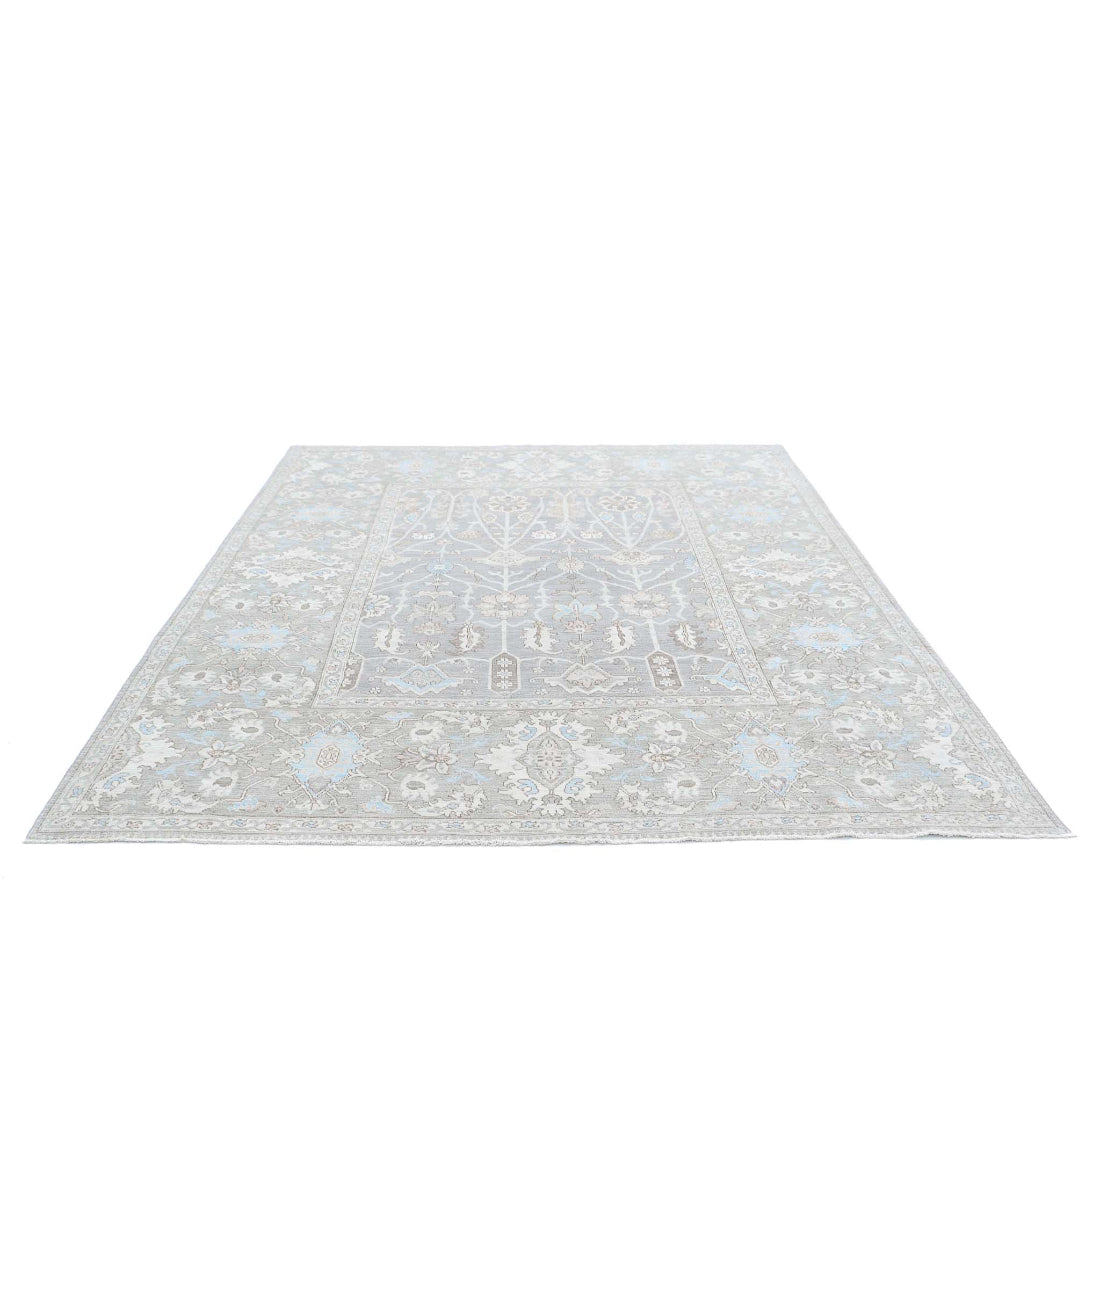 Hand Knotted Serenity Wool Rug - 7'11'' x 9'9'' 7'11'' x 9'9'' (238 X 293) / Grey / Ivory